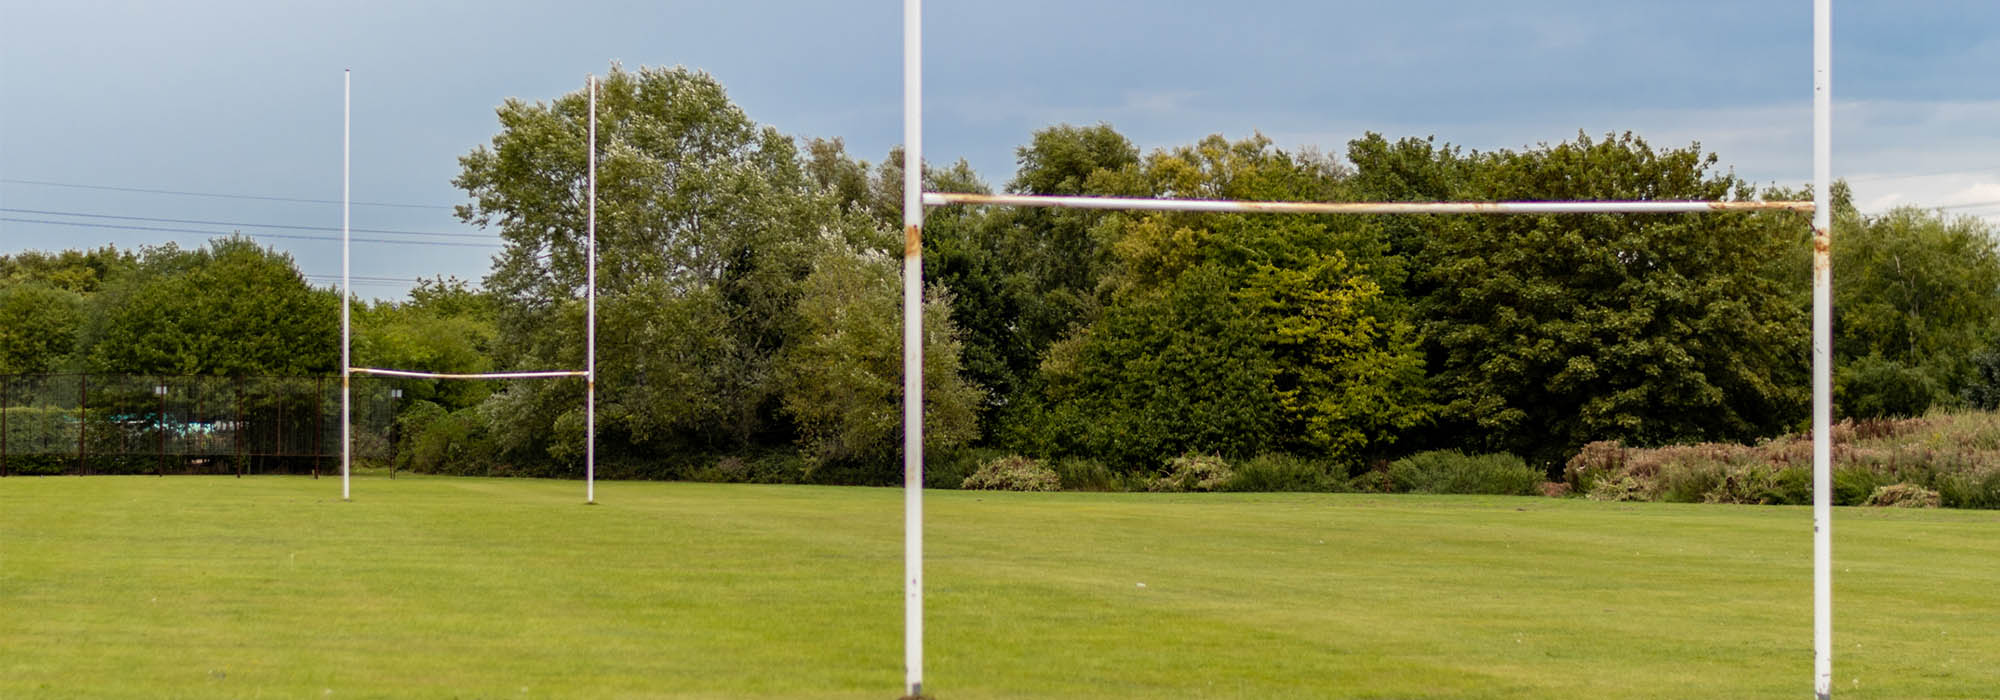 rugby pitch